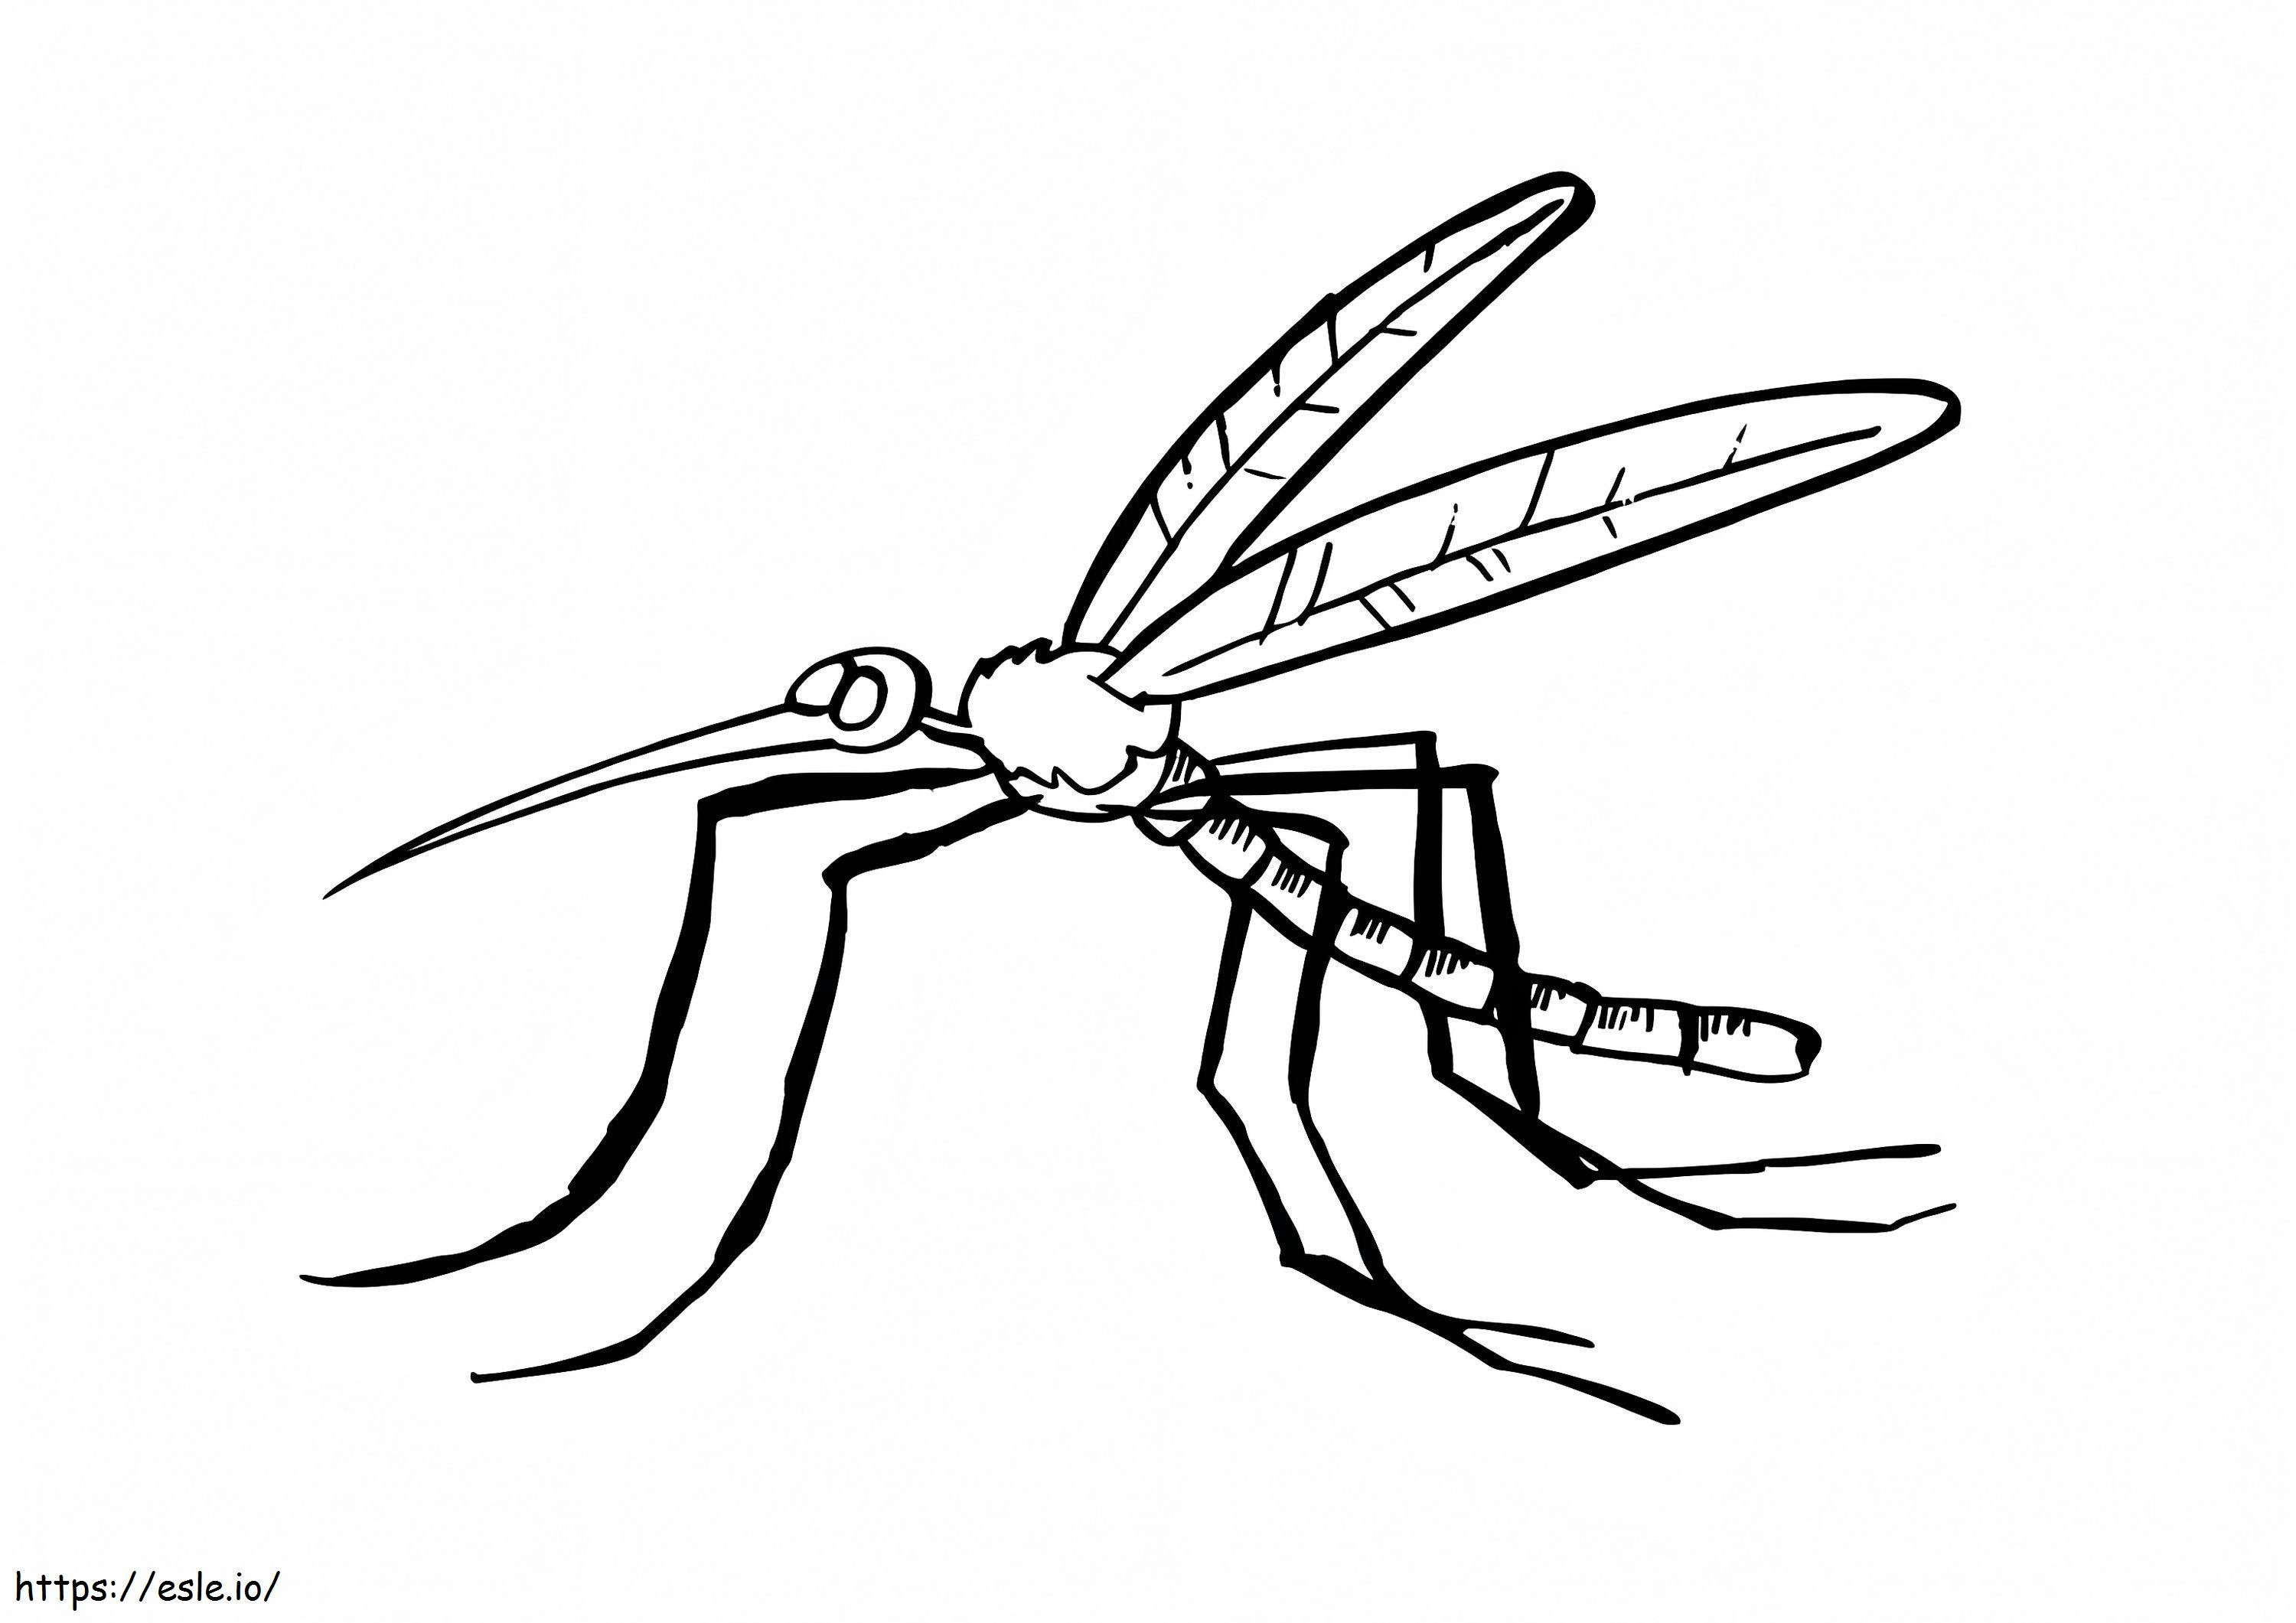 Mosquito 3 coloring page